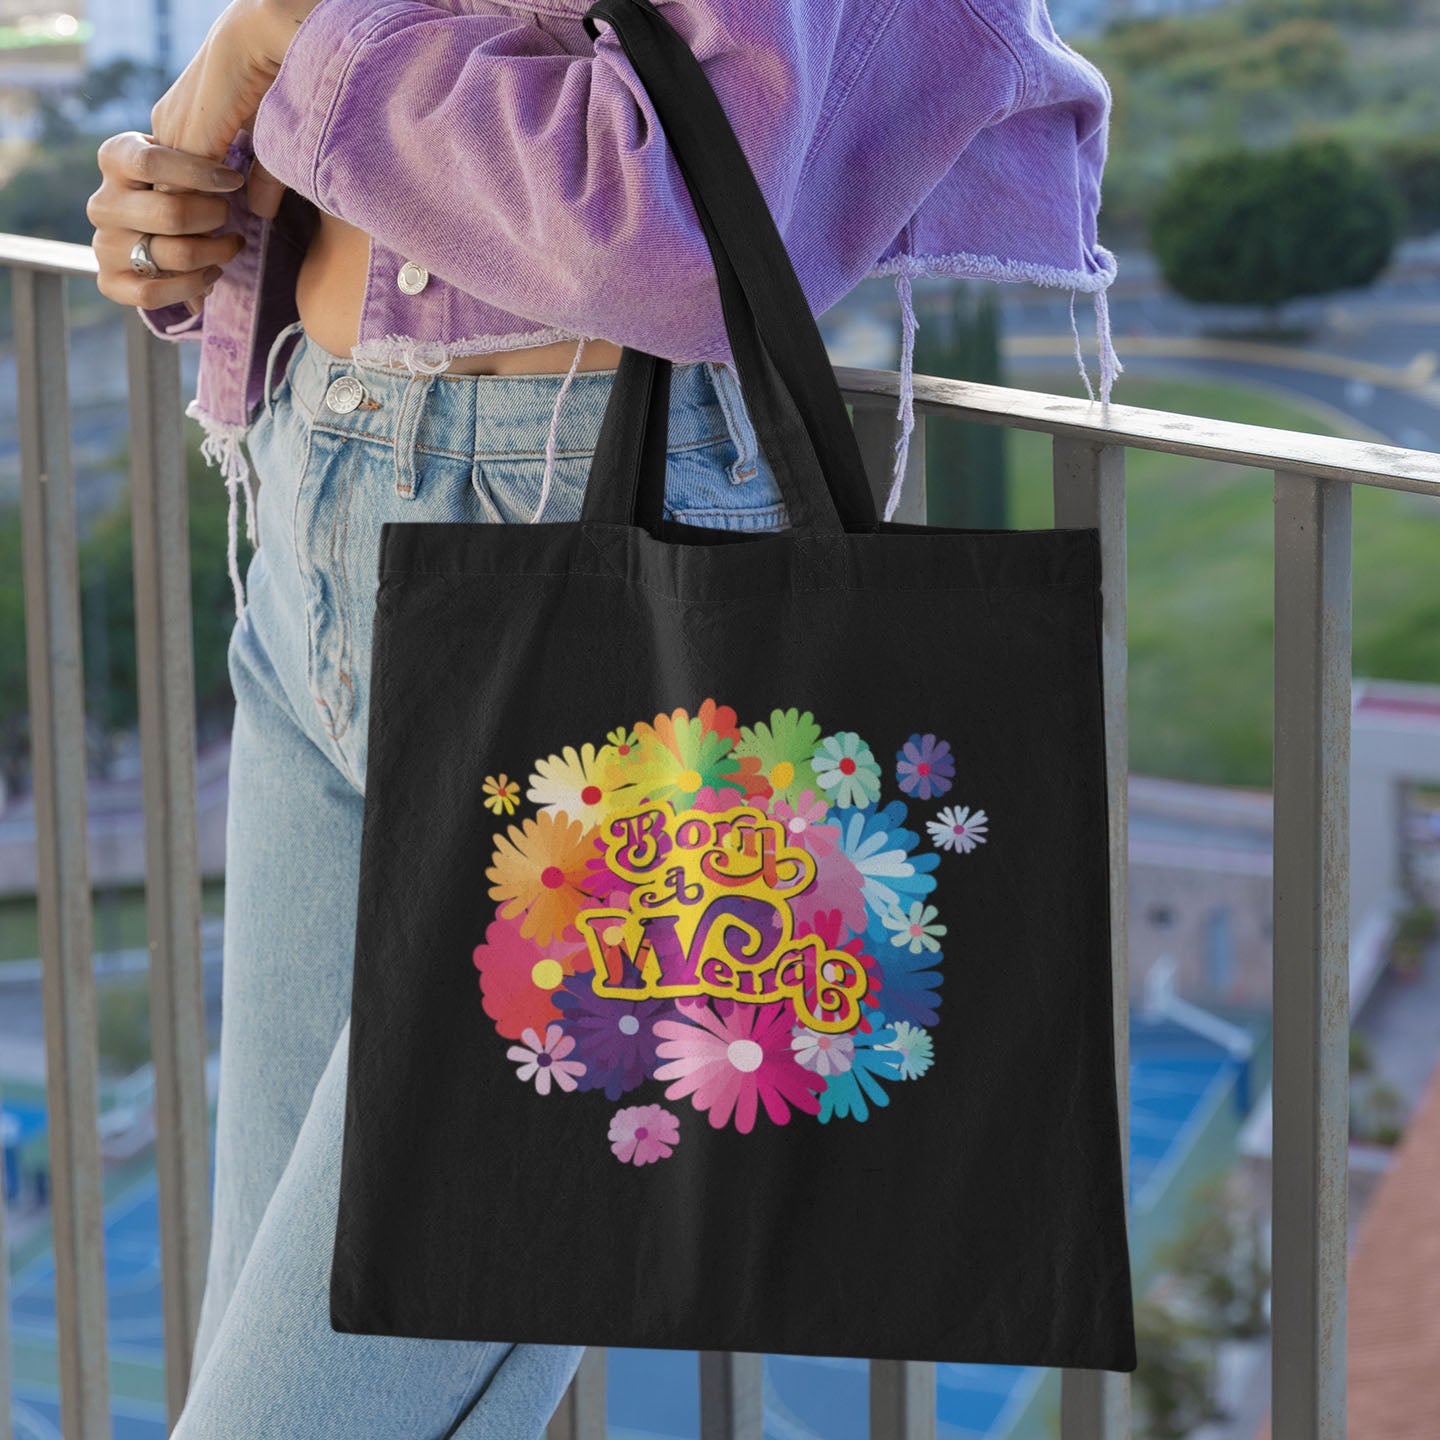 Black cotton tote bag with colorful design with flowers and funny meme: Born a weirdo!